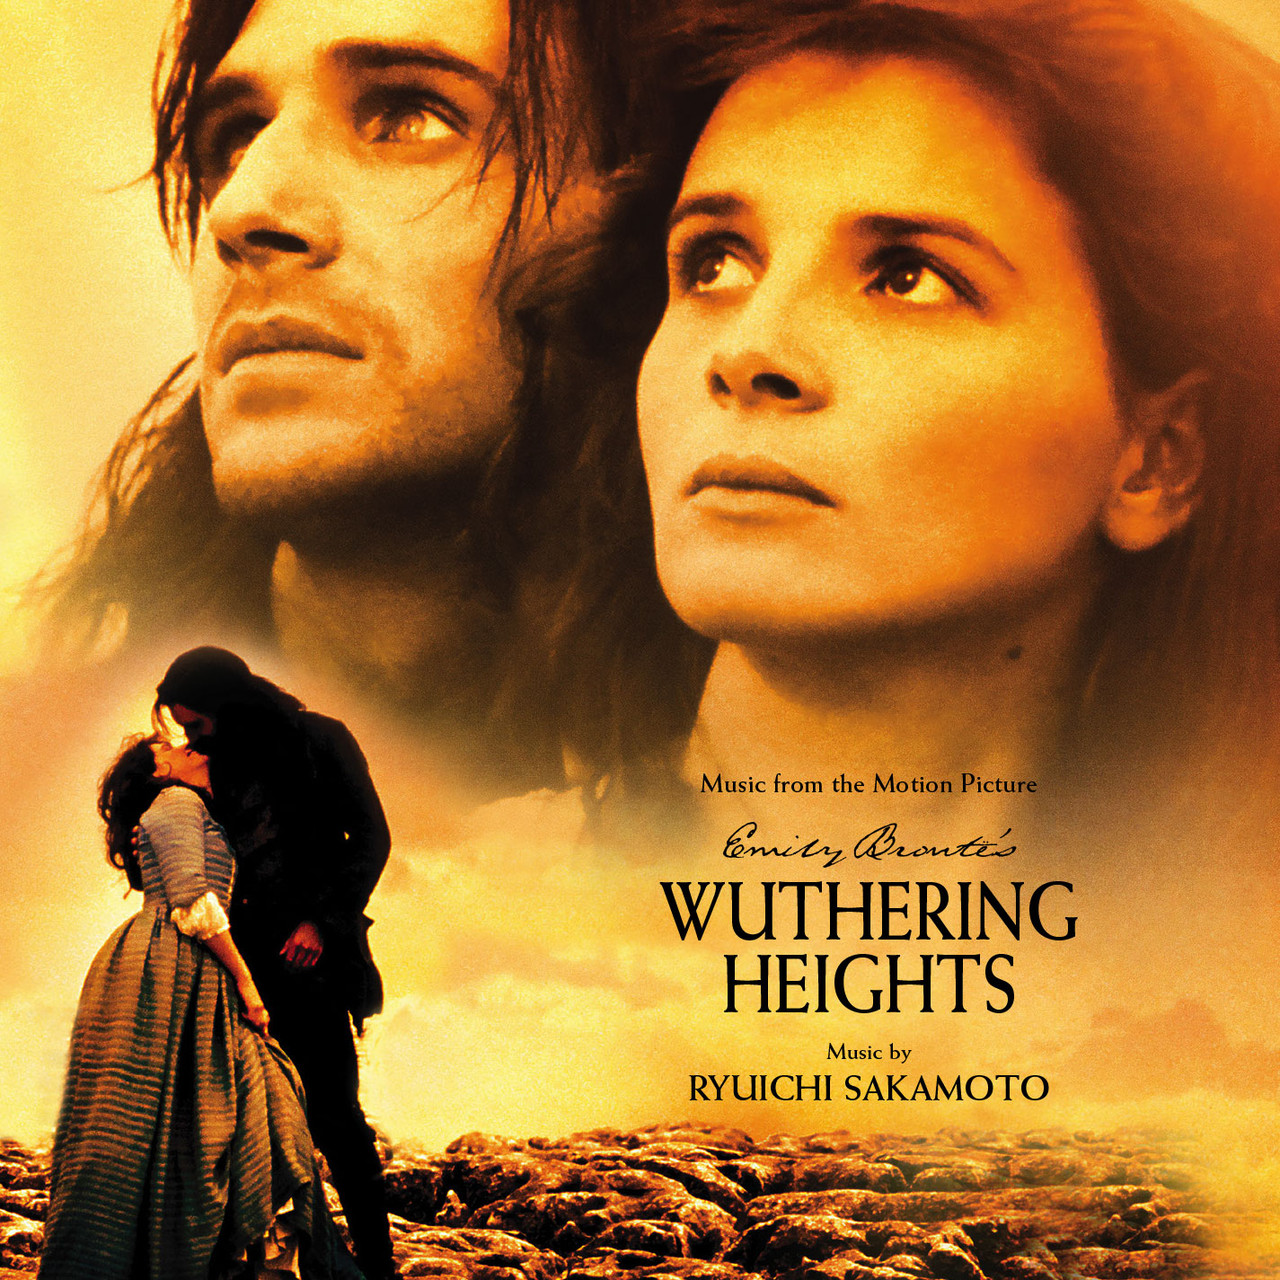 EMILY BRONTE’S WUTHERING HEIGHTS: LIMITED EDITION